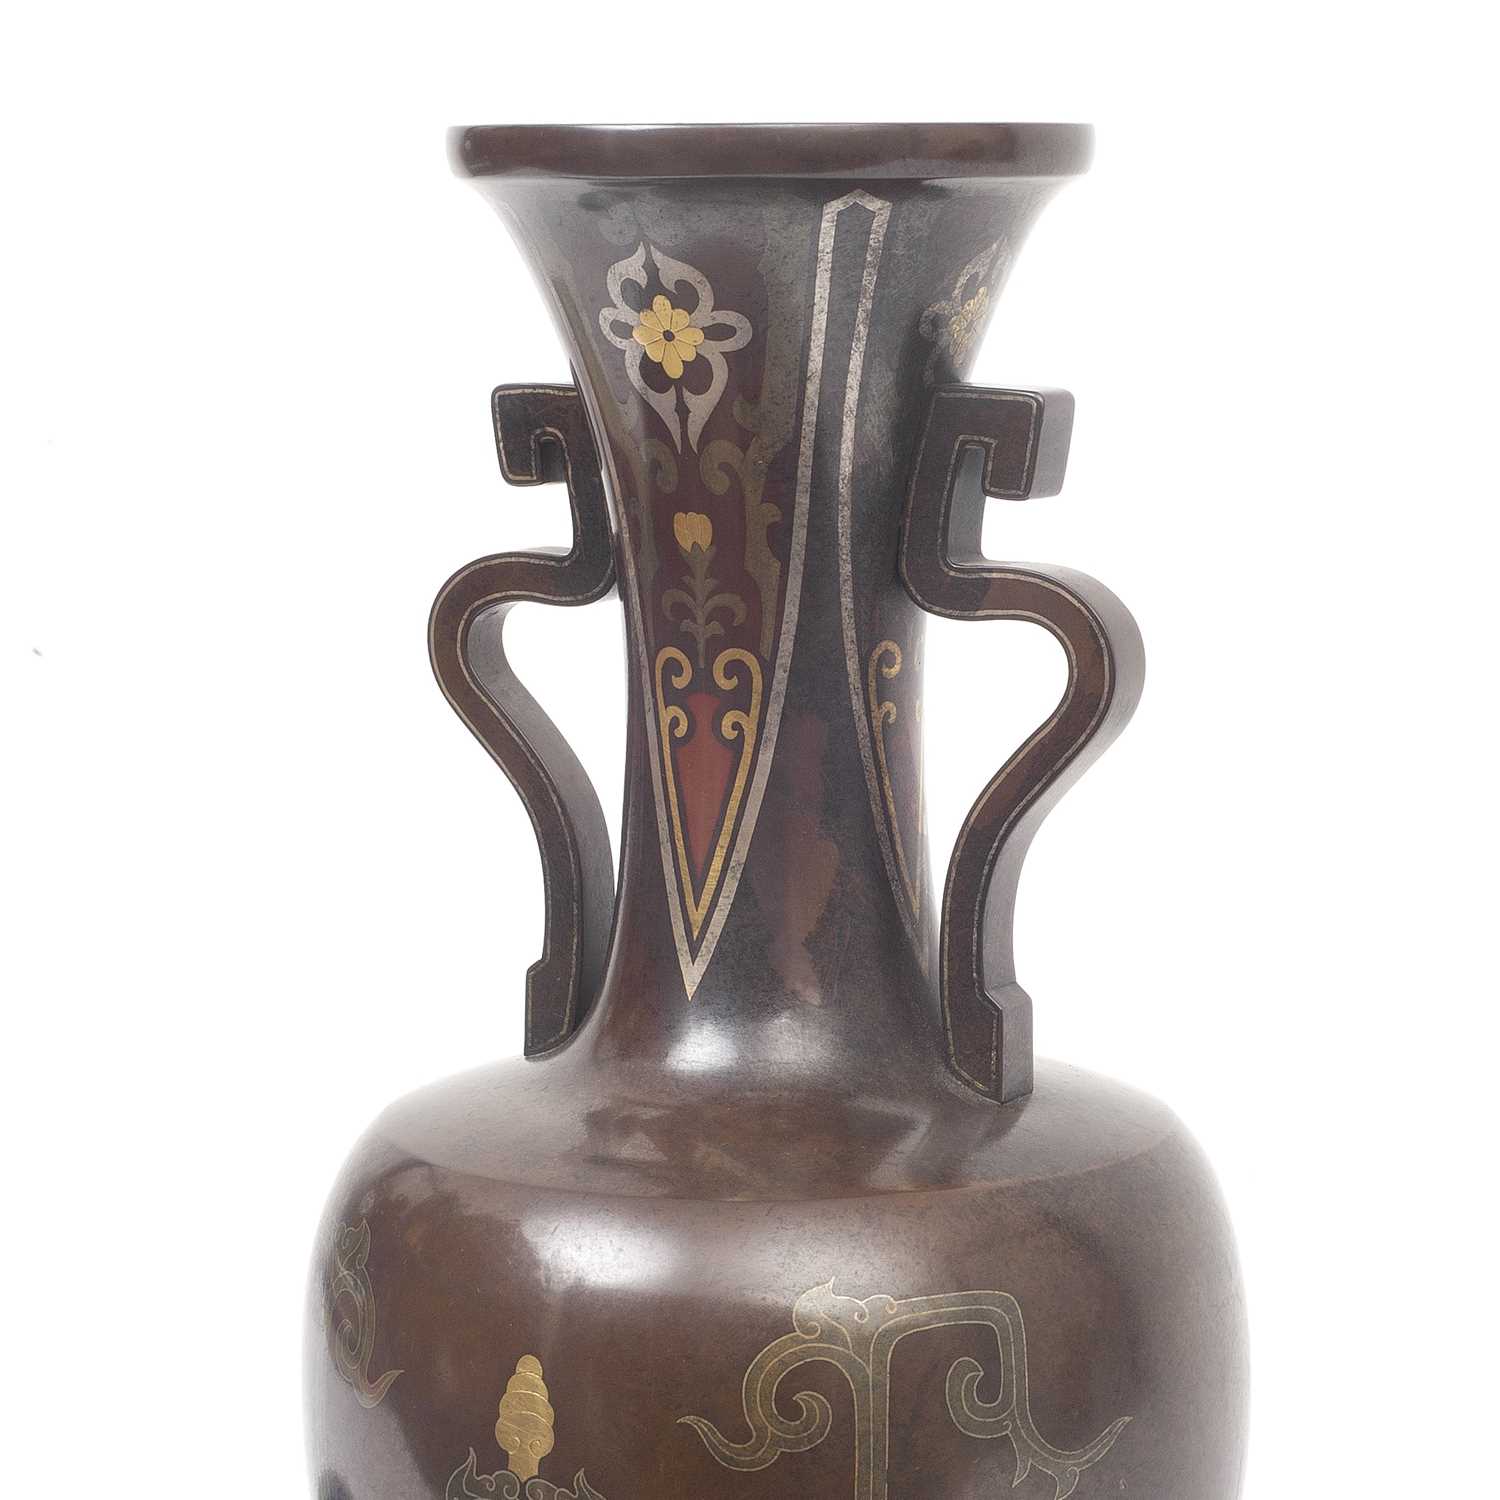 A FINE JAPANESE IMPERIAL MEIJI PERIOD BRONZE INLAID VASE - Image 2 of 2